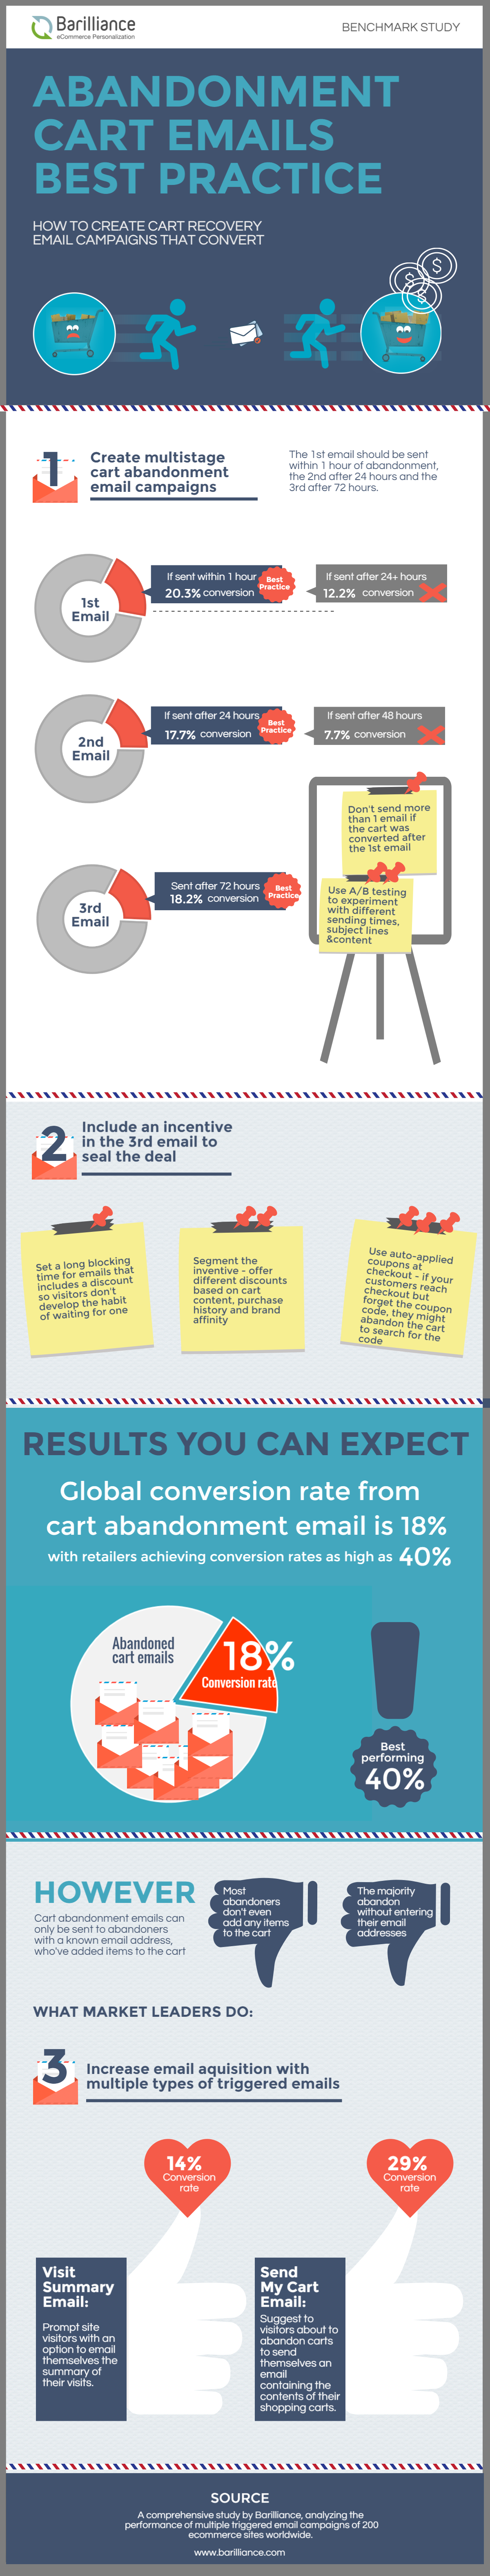 Infographic - Cart abandonment emails best practice statistics